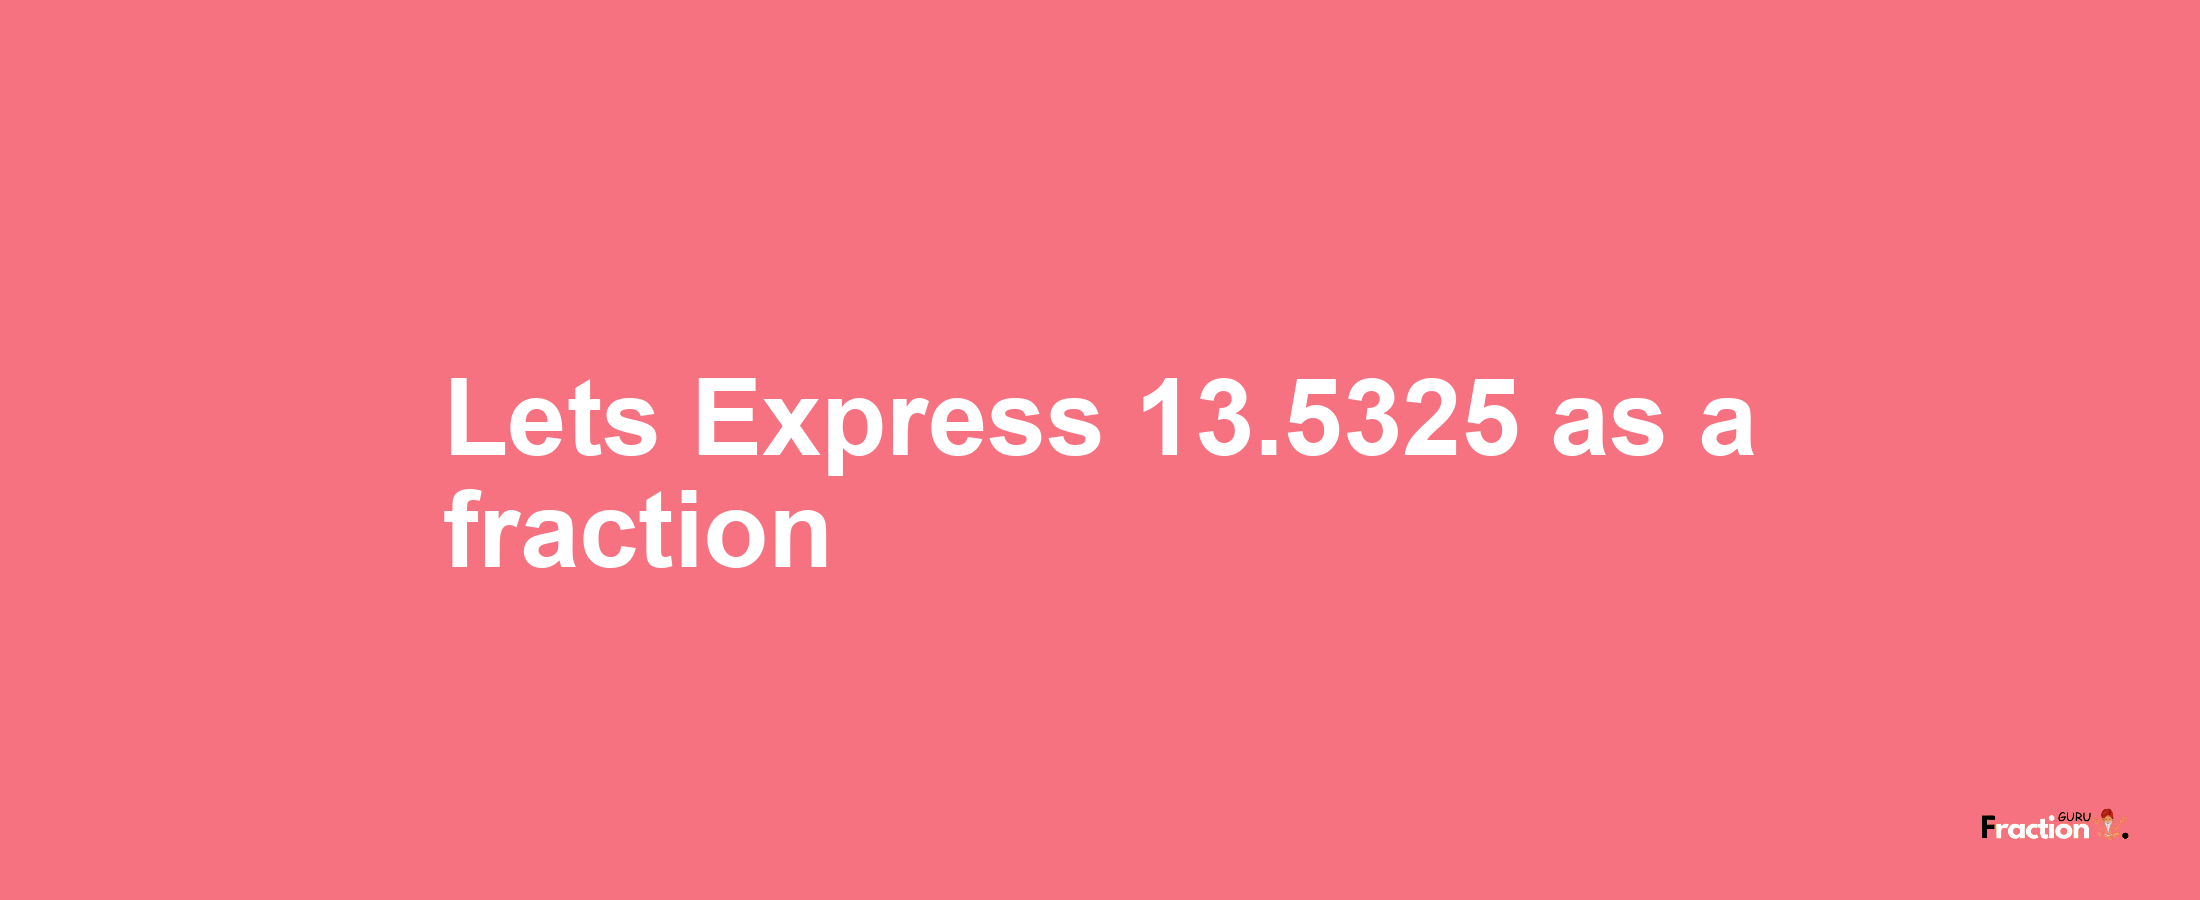 Lets Express 13.5325 as afraction